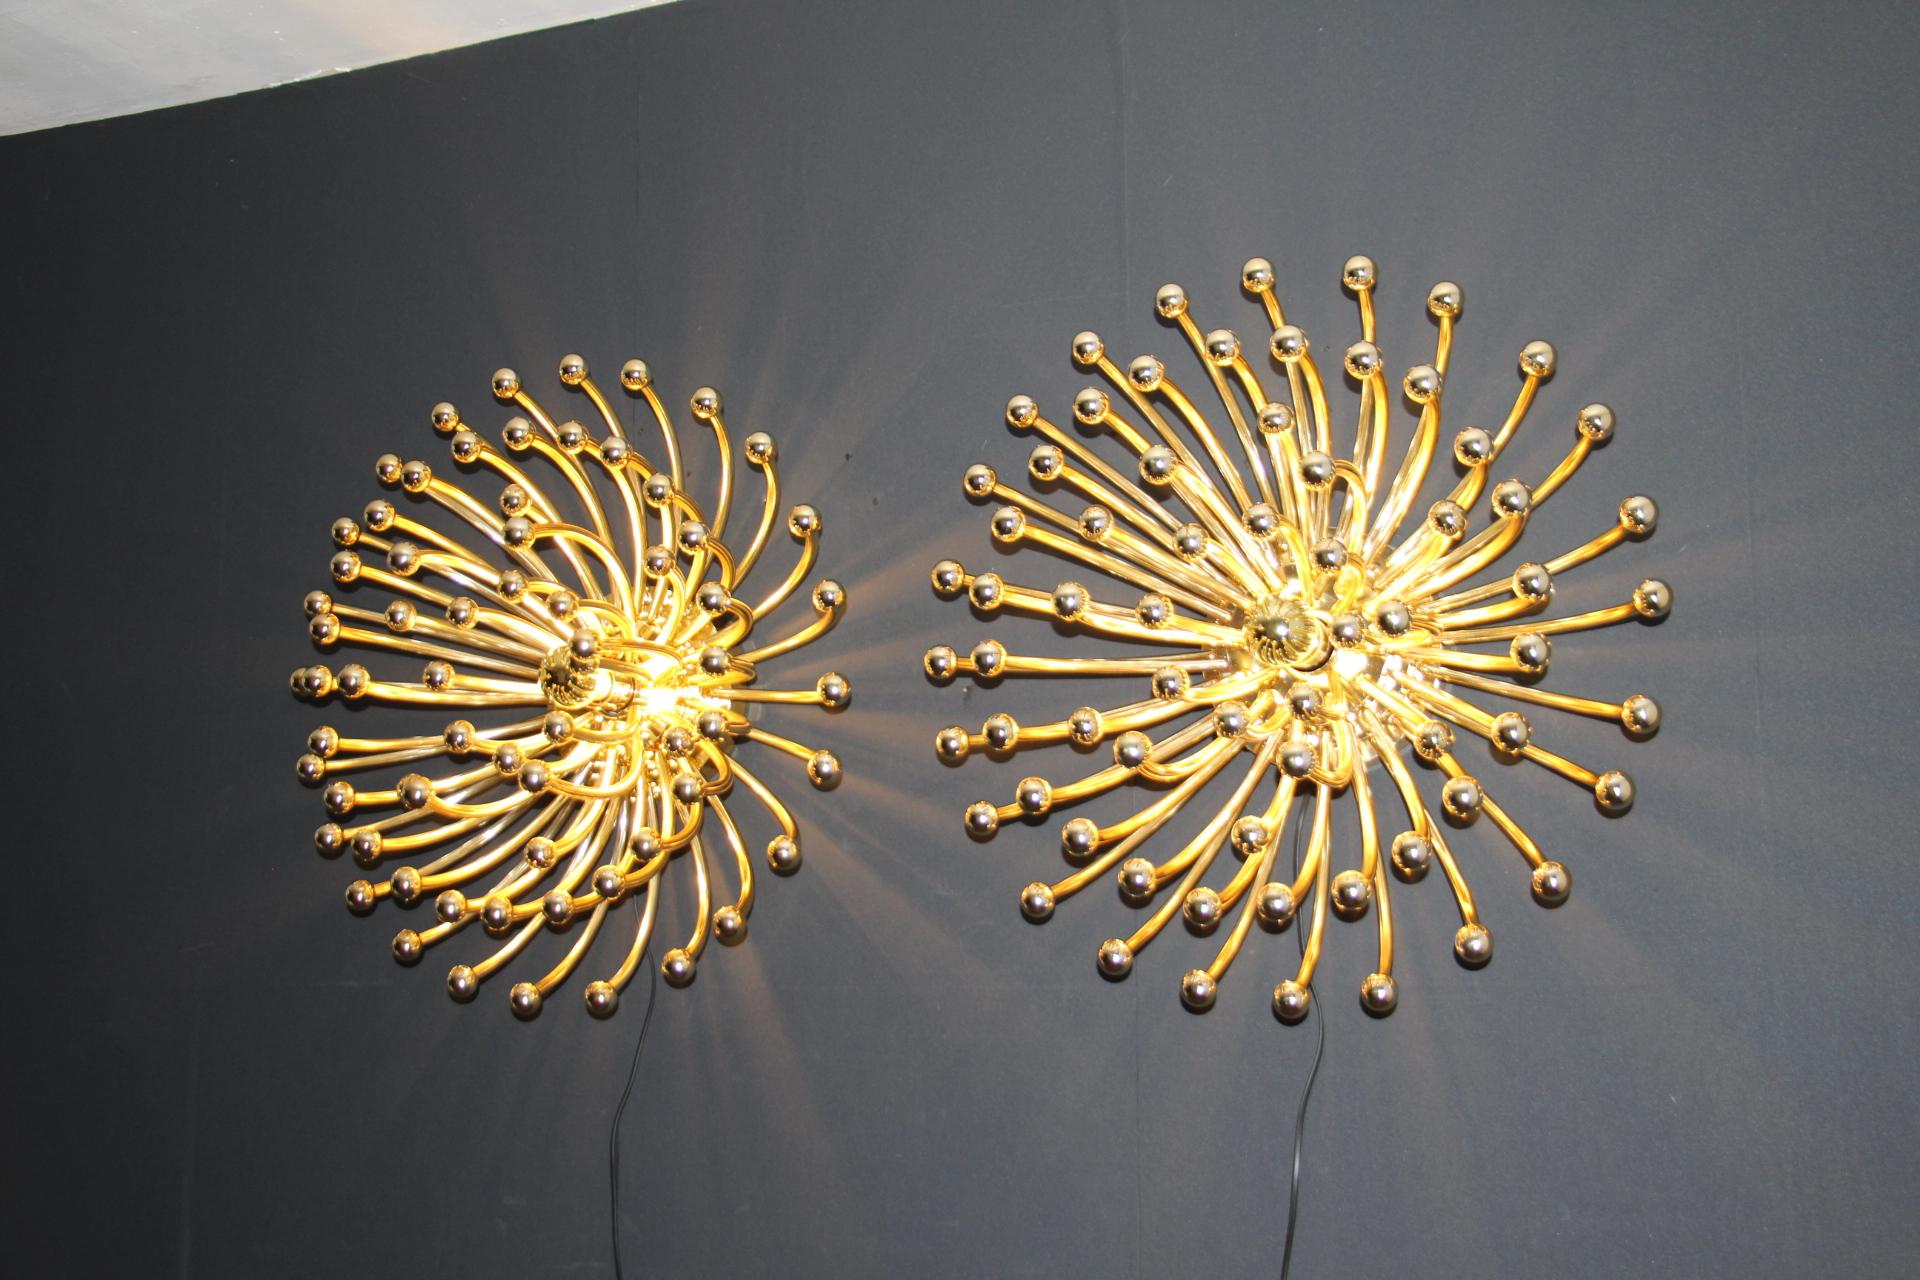  60 cm Gold Pistillo Chandeliers, table lamps or Wall Lamps By Valenti Milano For Sale 9